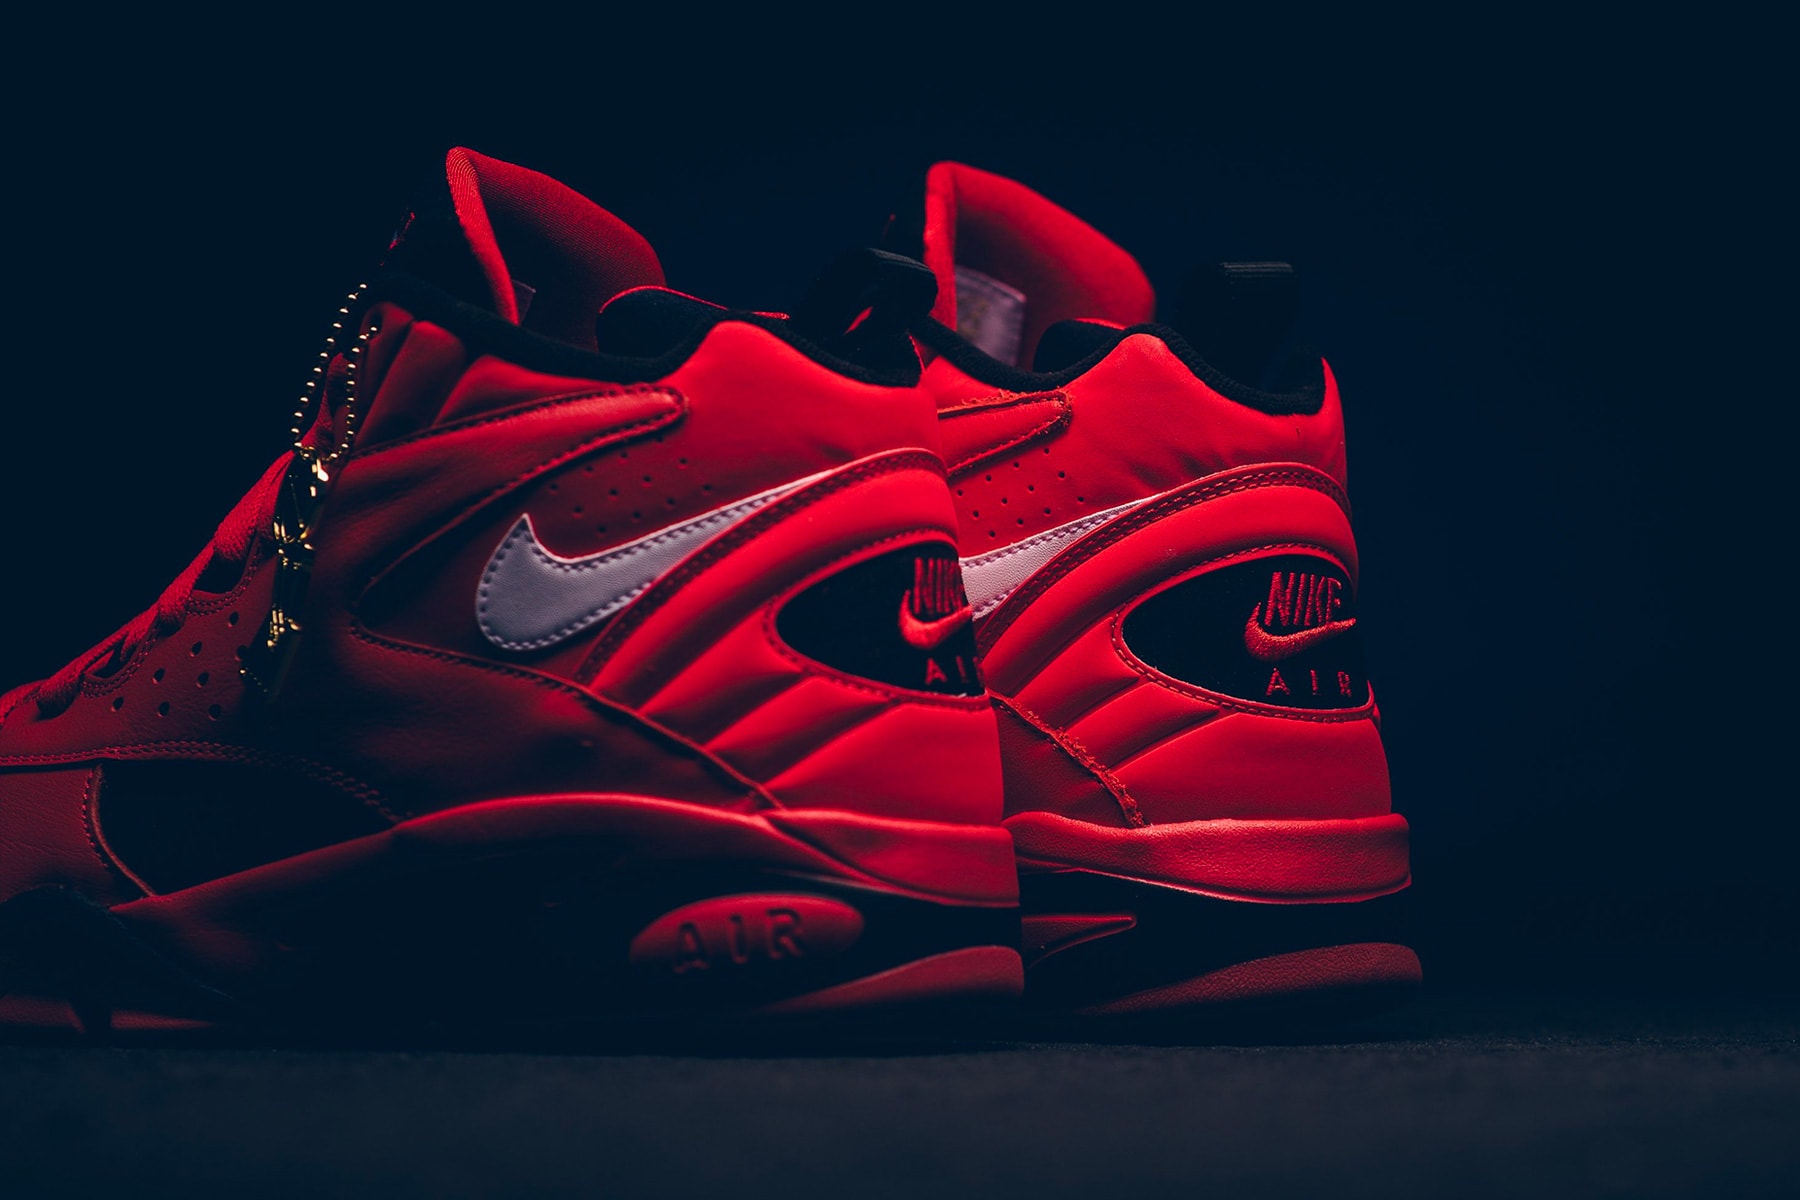 Nike Air Maestro II "Trifecta" Release Date purchase closer look price sneakers scottie pippen red nba